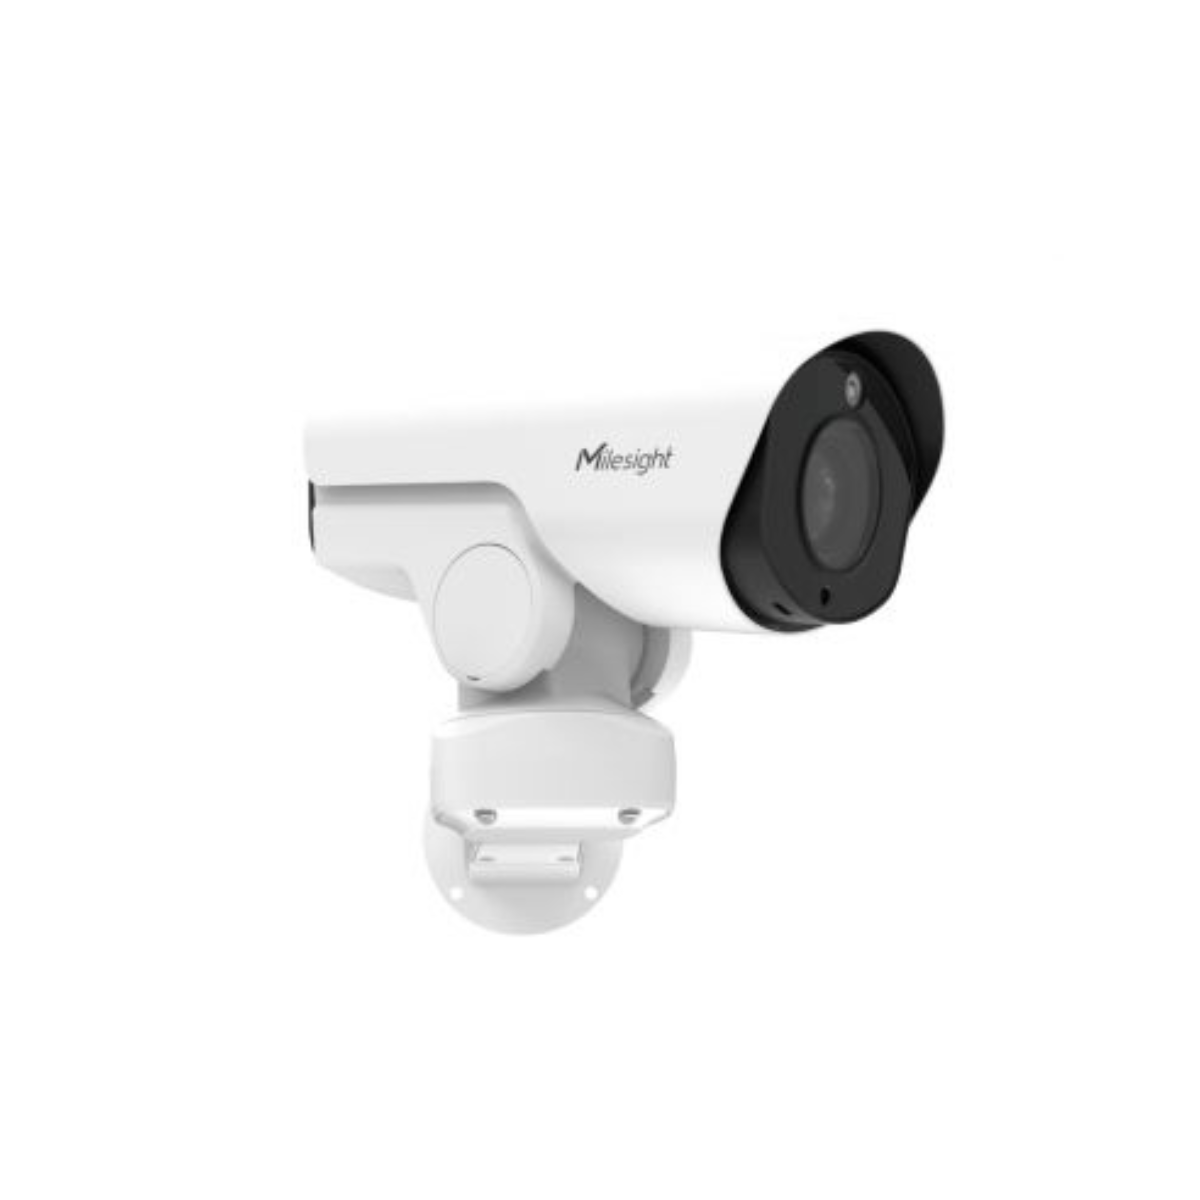 High-Resolution PTZ Bullet Camera with AI Technology and 23X Optical Zoom